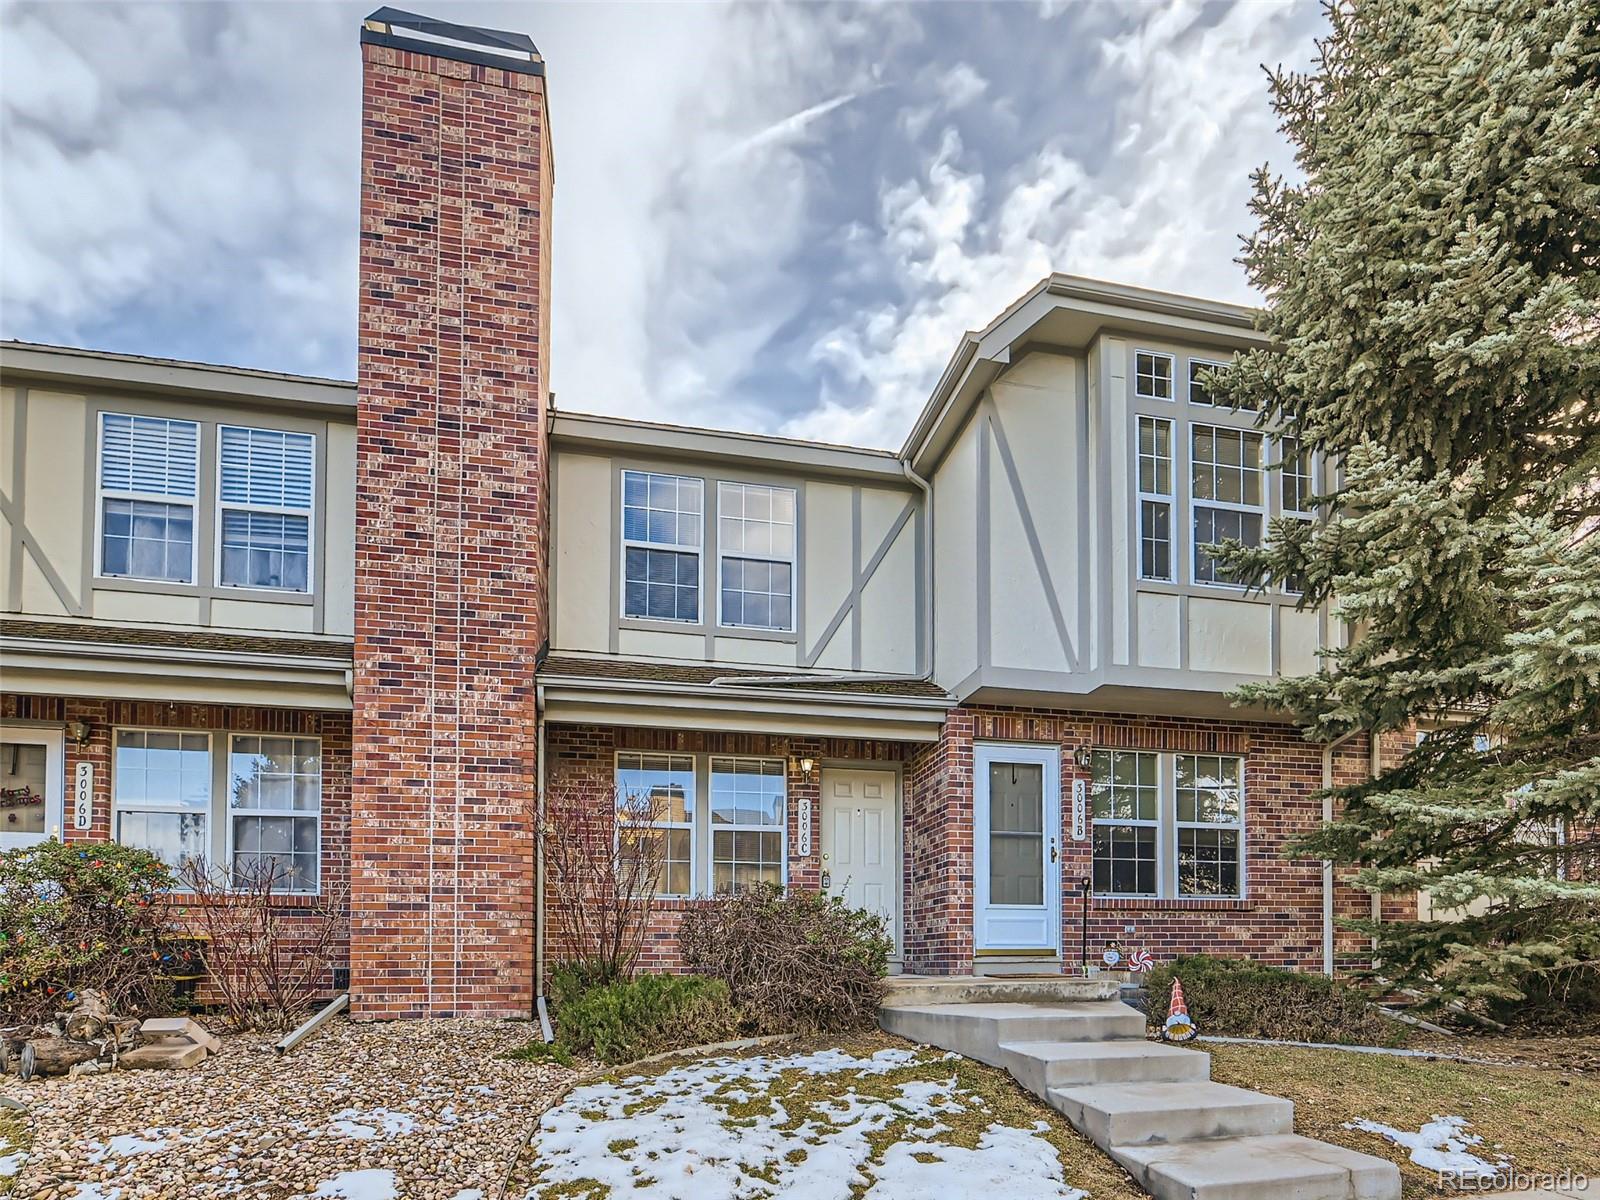 Report Image for 3006 W 107th Place,Westminster, Colorado